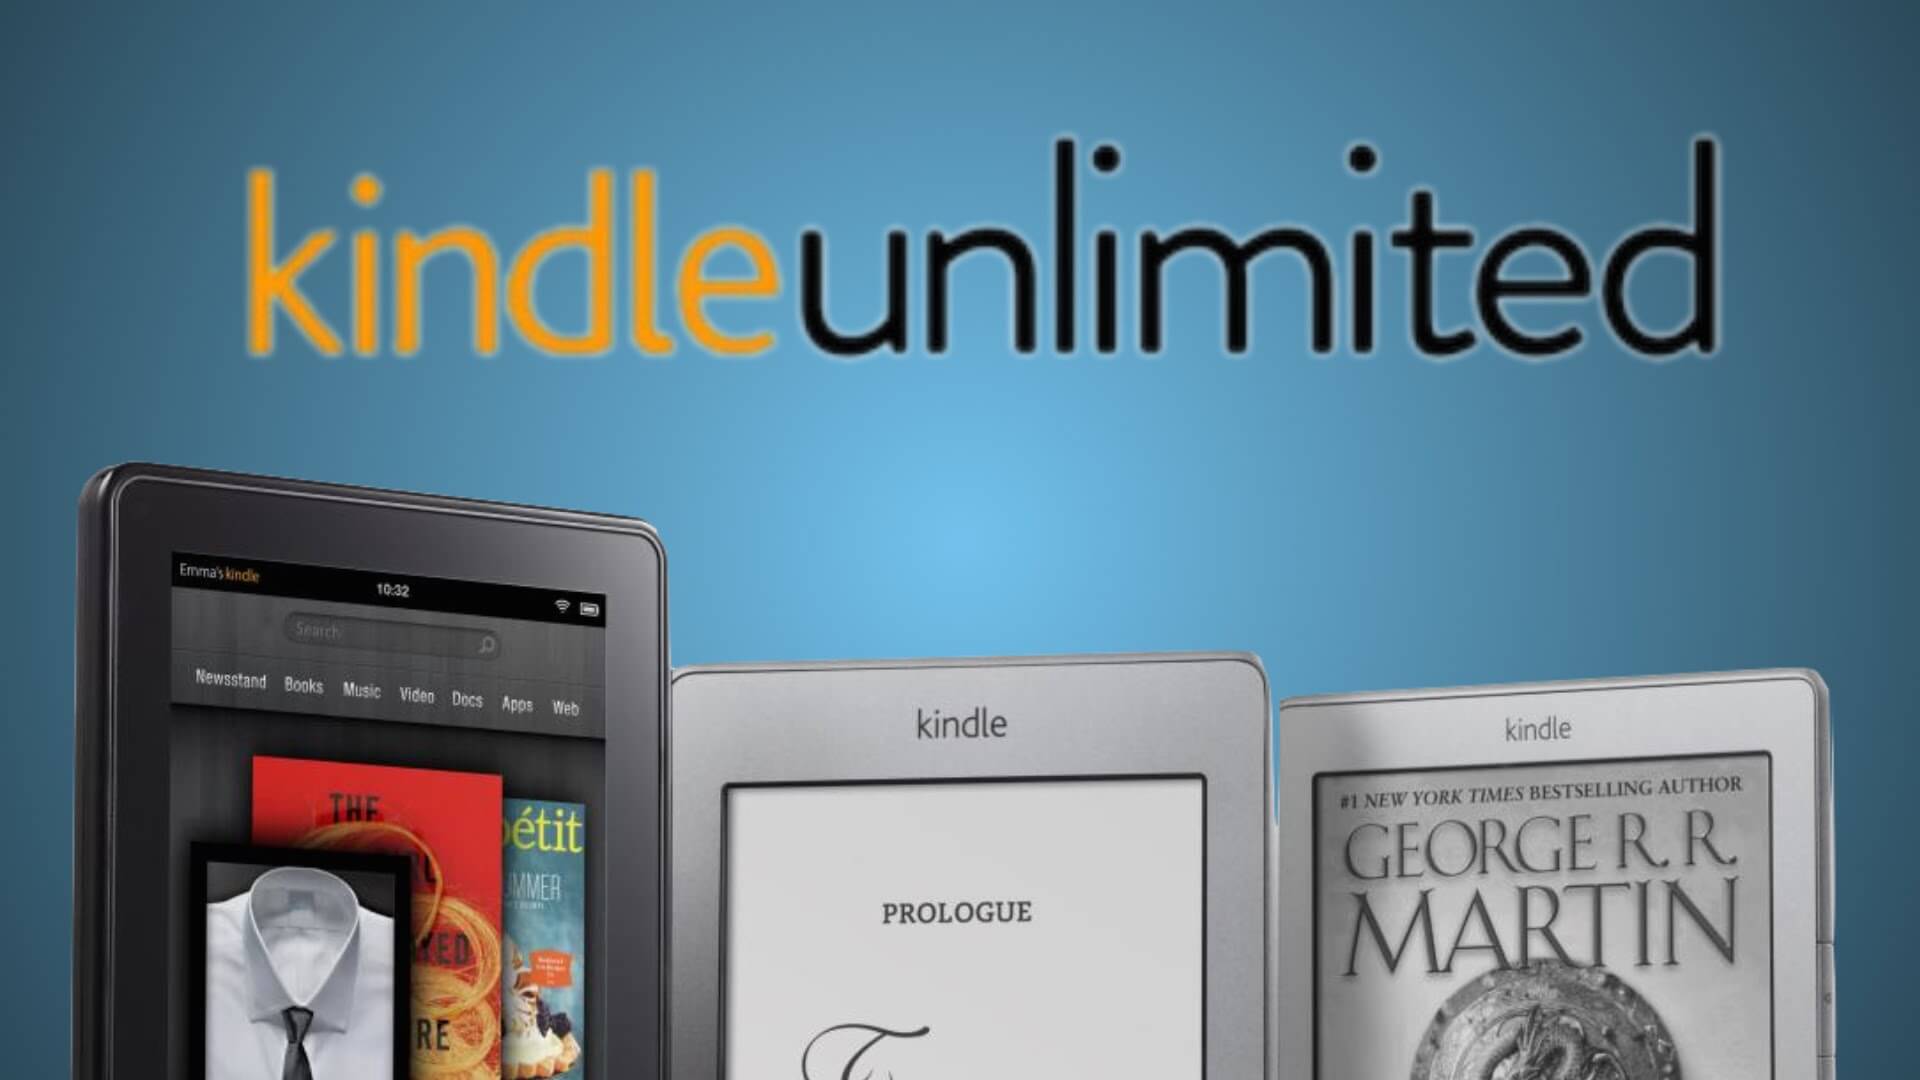 Get 3 Months of Kindle Unlimited for $1 Black Friday Deal